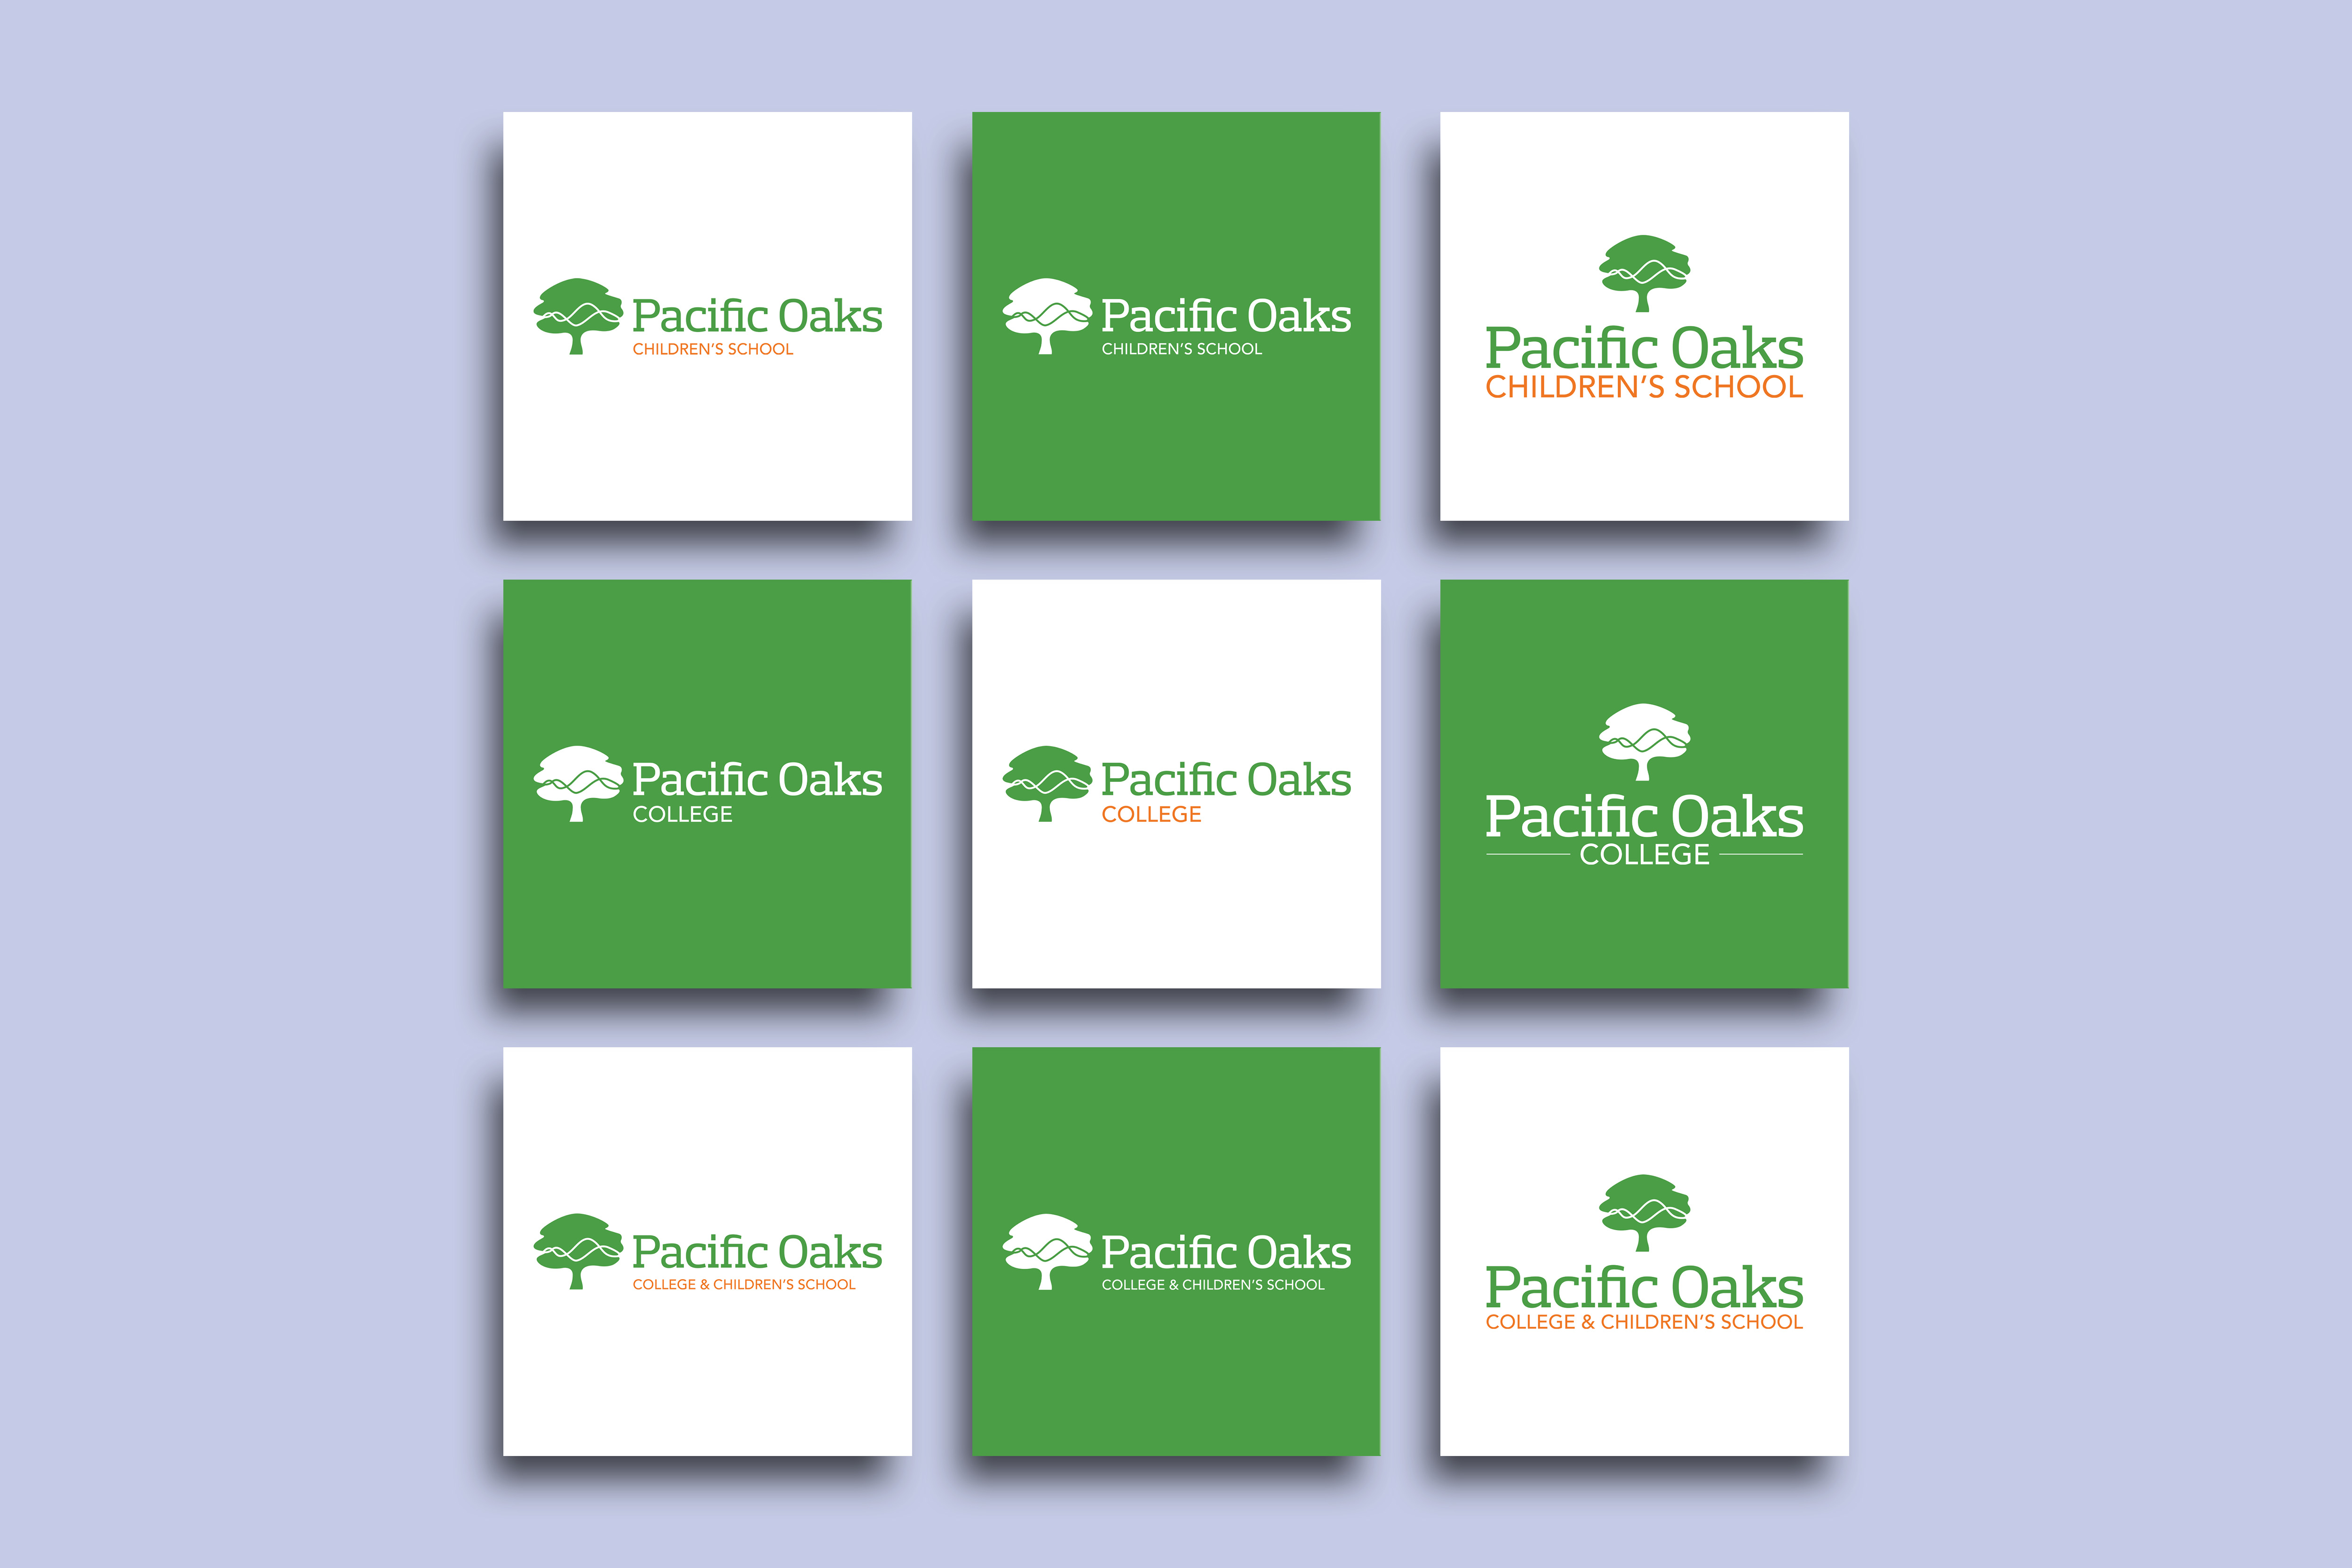 Refreshed Pacific Oaks College Logos in a Grid Mockup